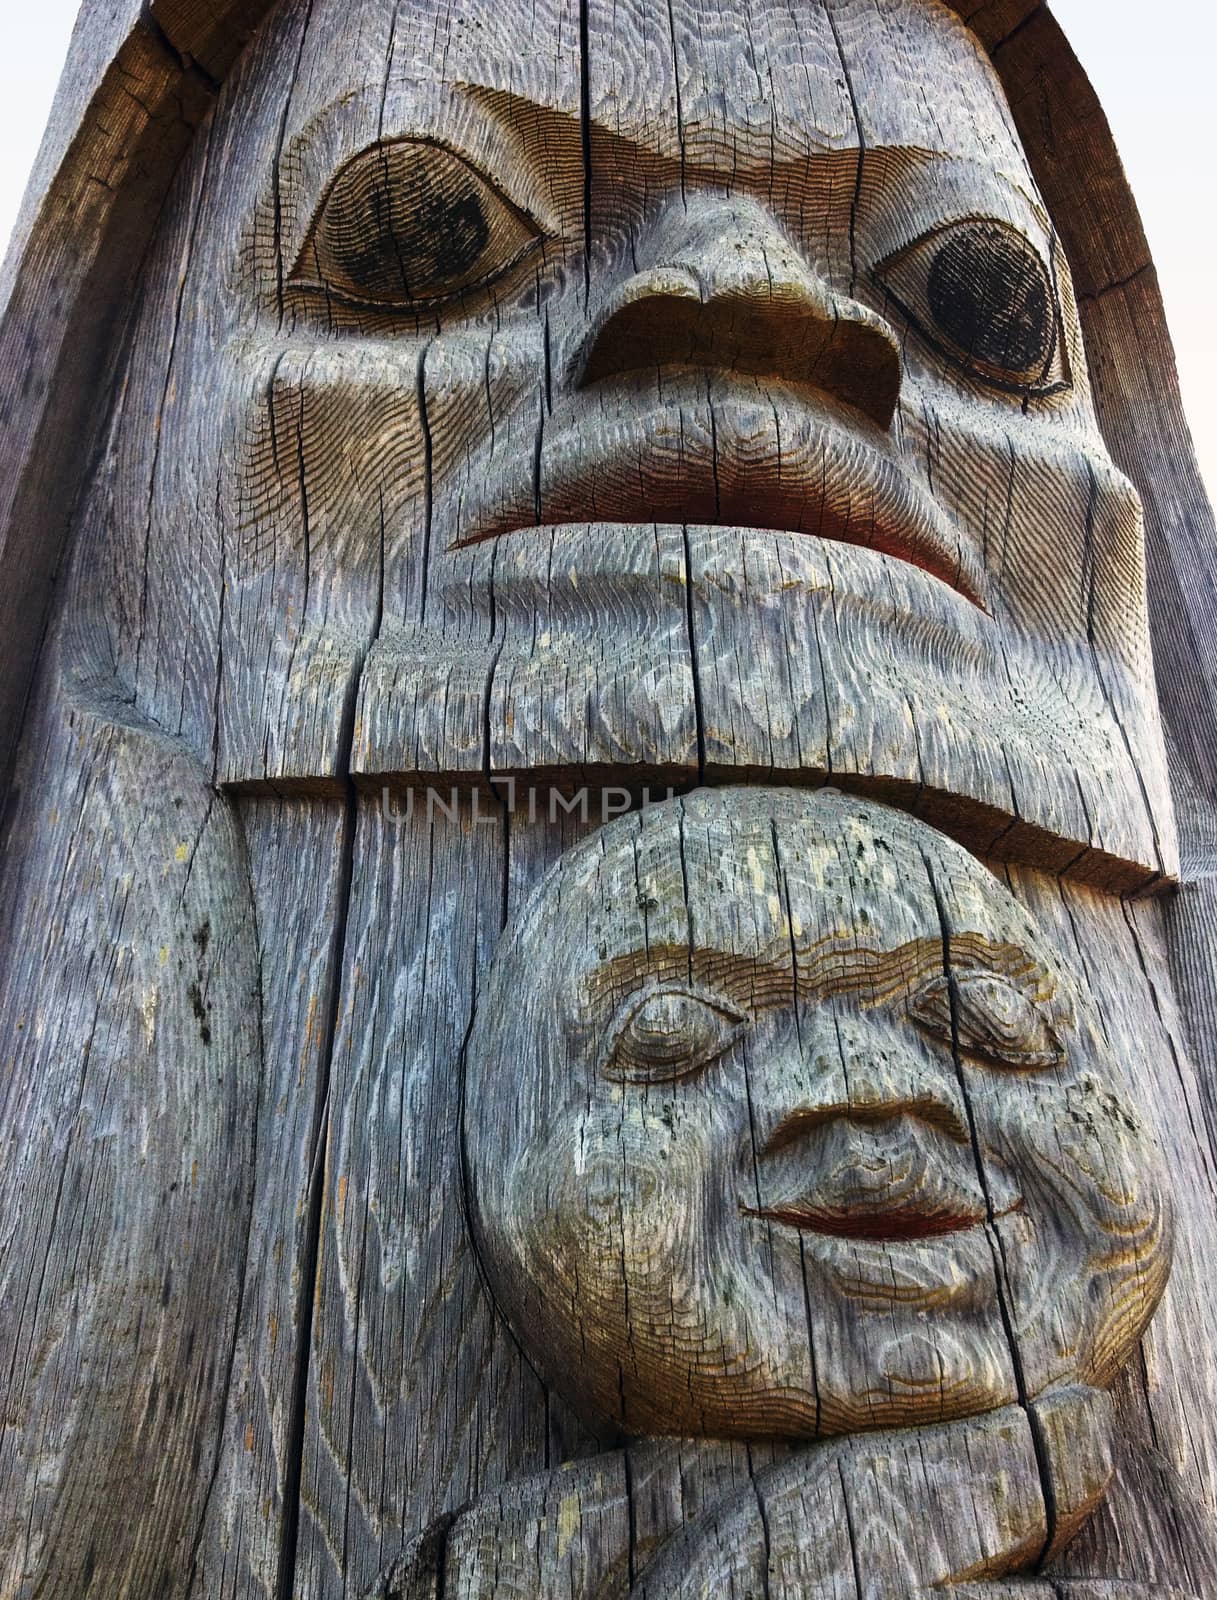 Vancouver, BC, Canada - 7/8/2012: Detail of a Songhees totem pole. A mother and her child are portrayed.
